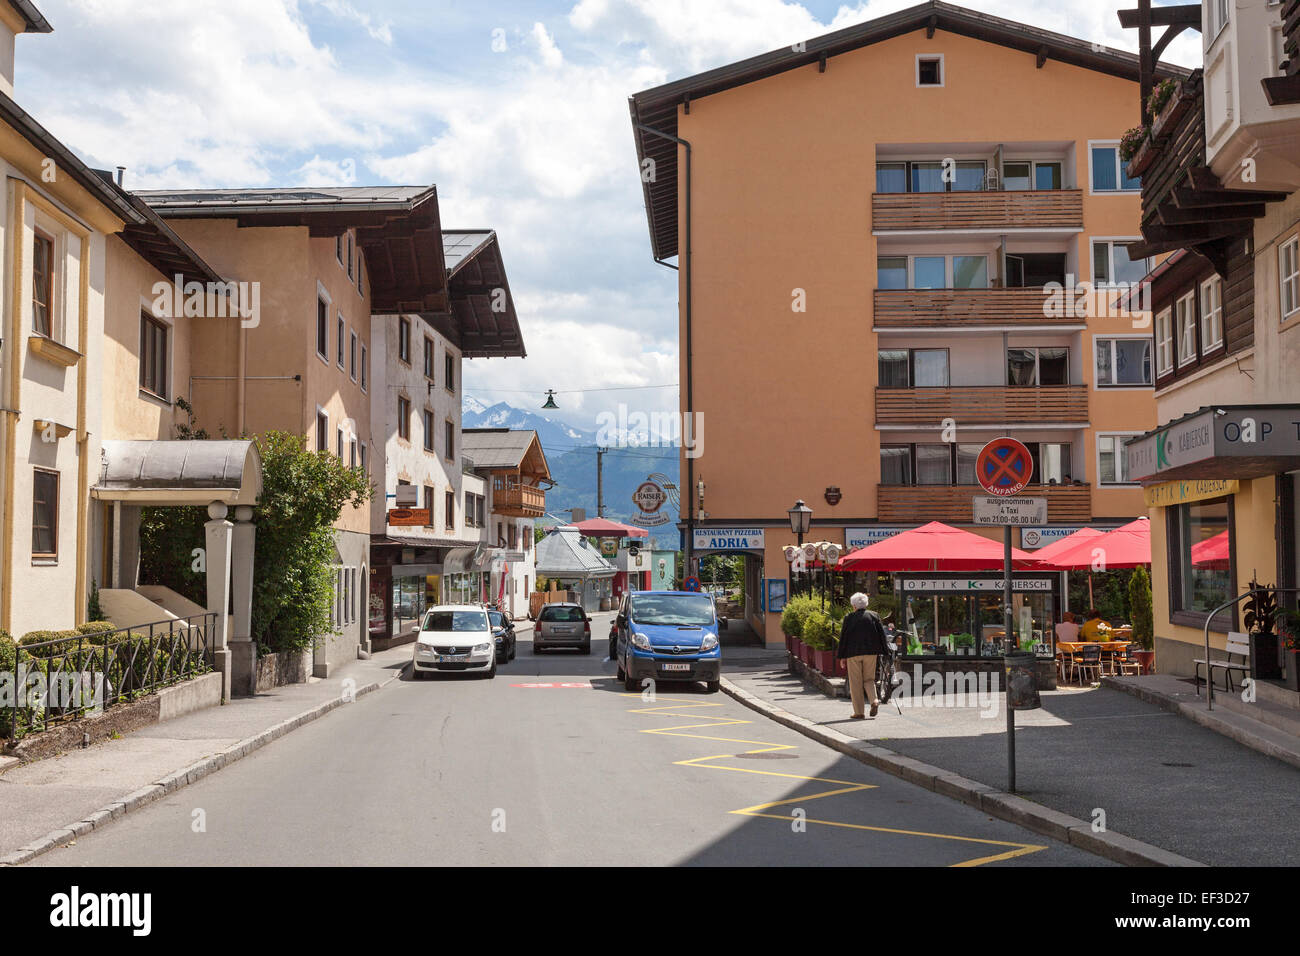 Zell am See Austria Stock Photo